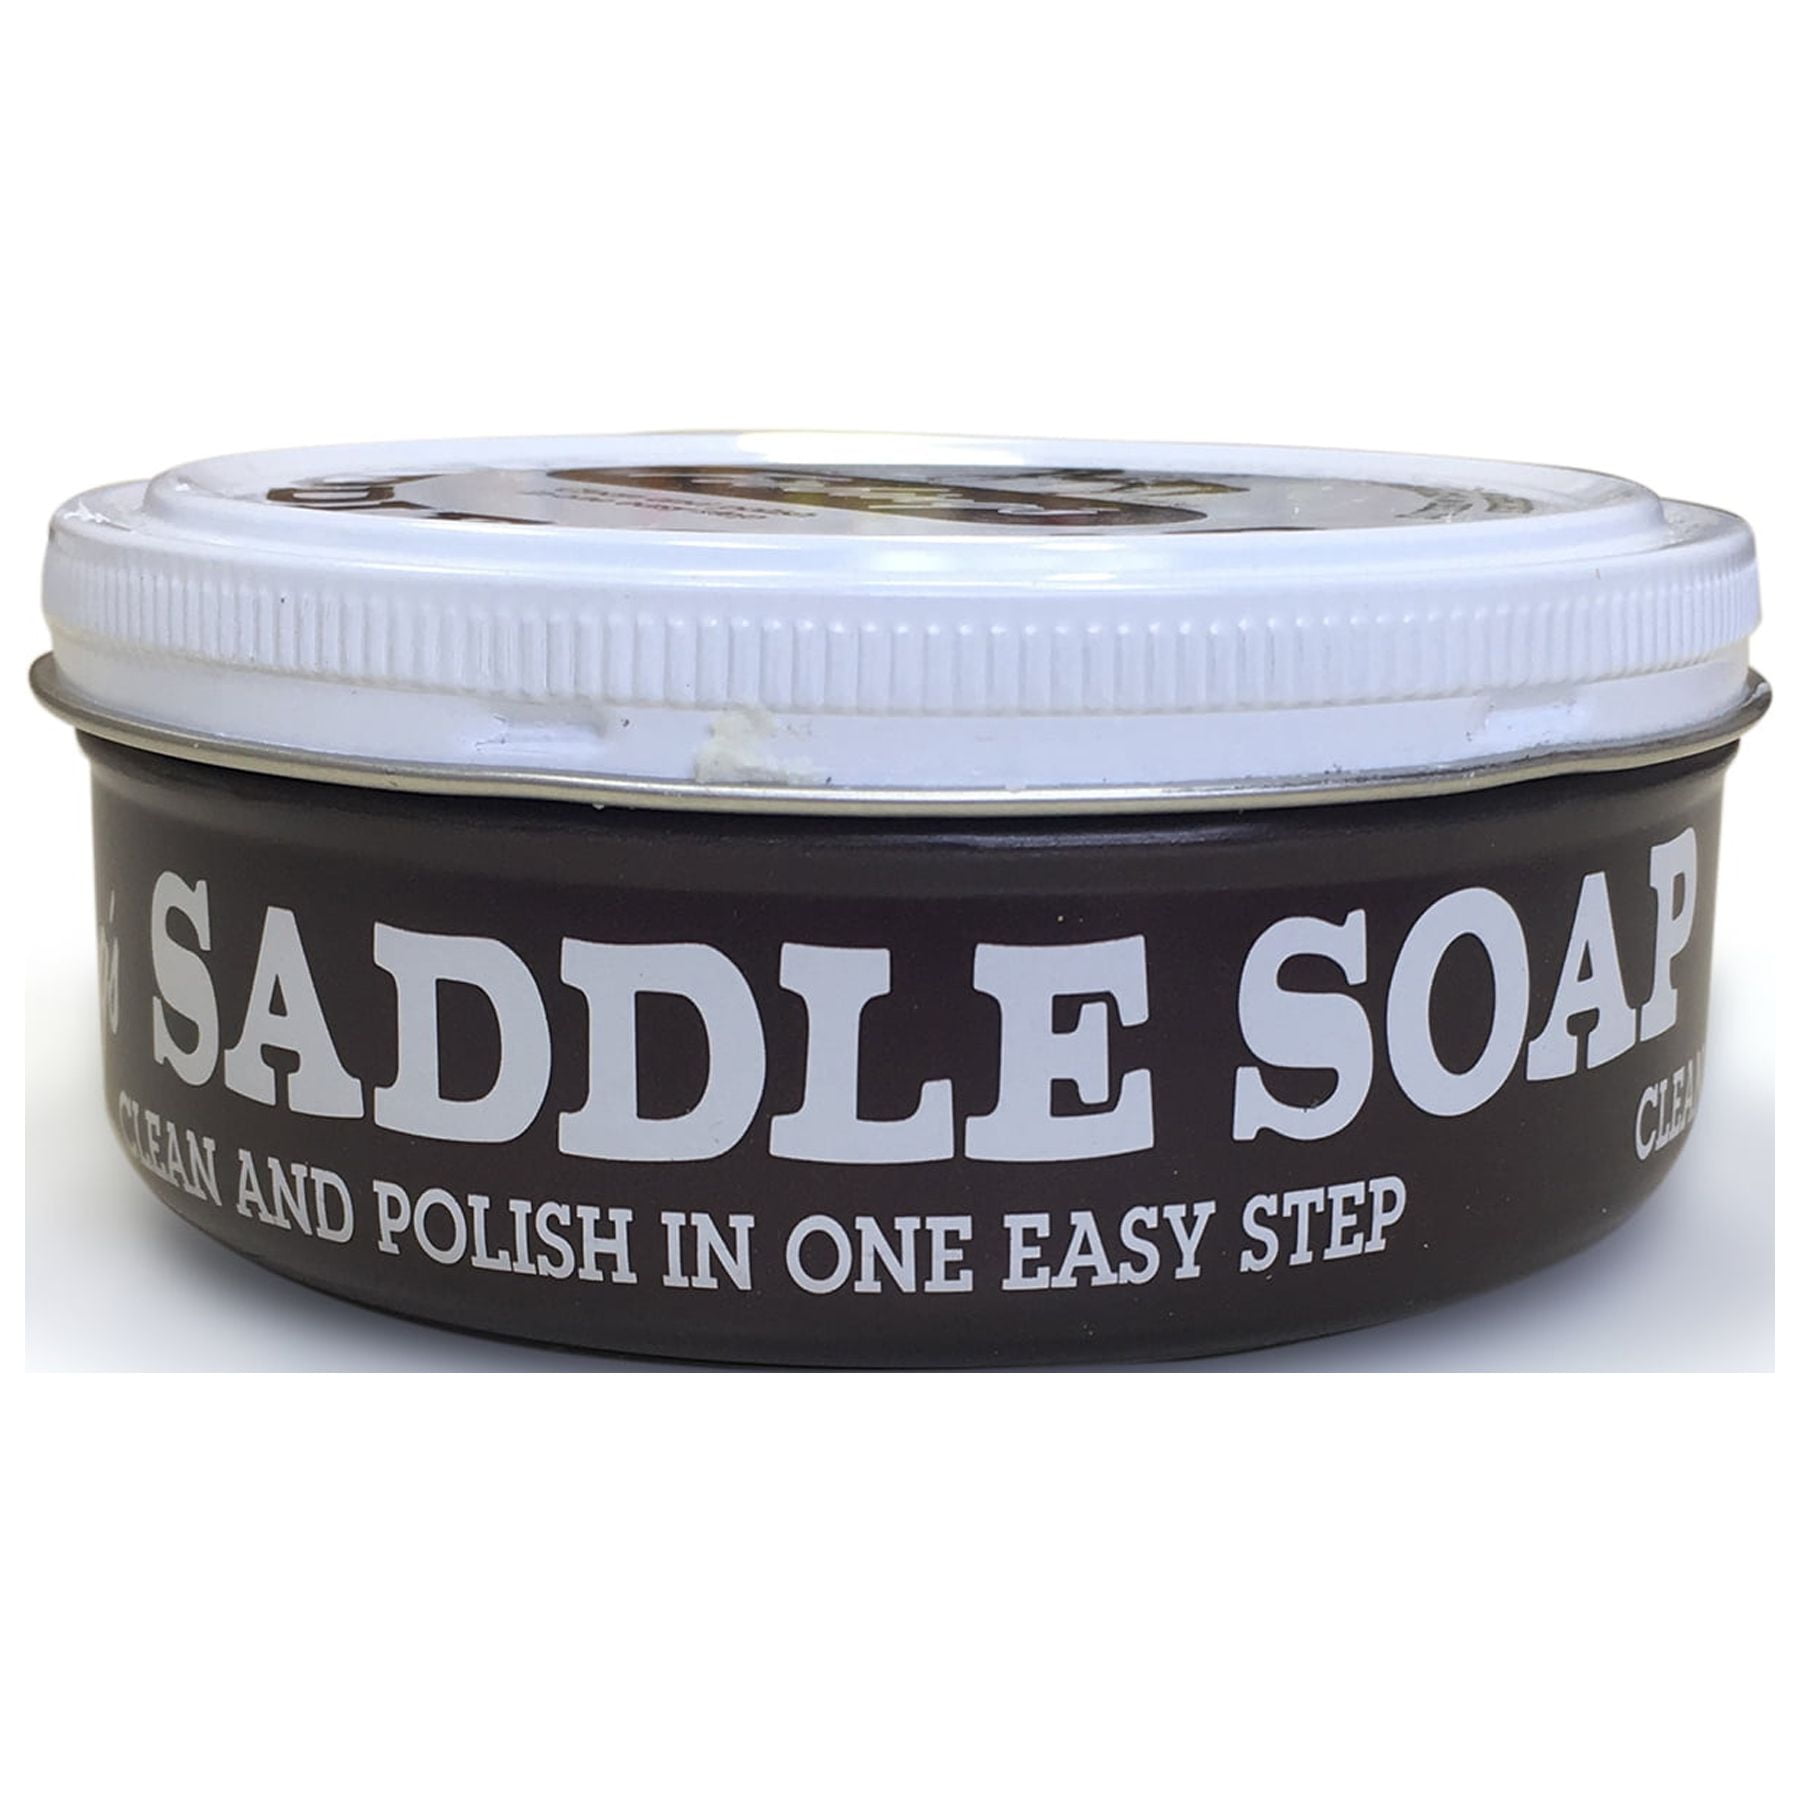 Fiebing's White Saddle Soap, 12 oz. Cleans, Softens and Preserves Leather